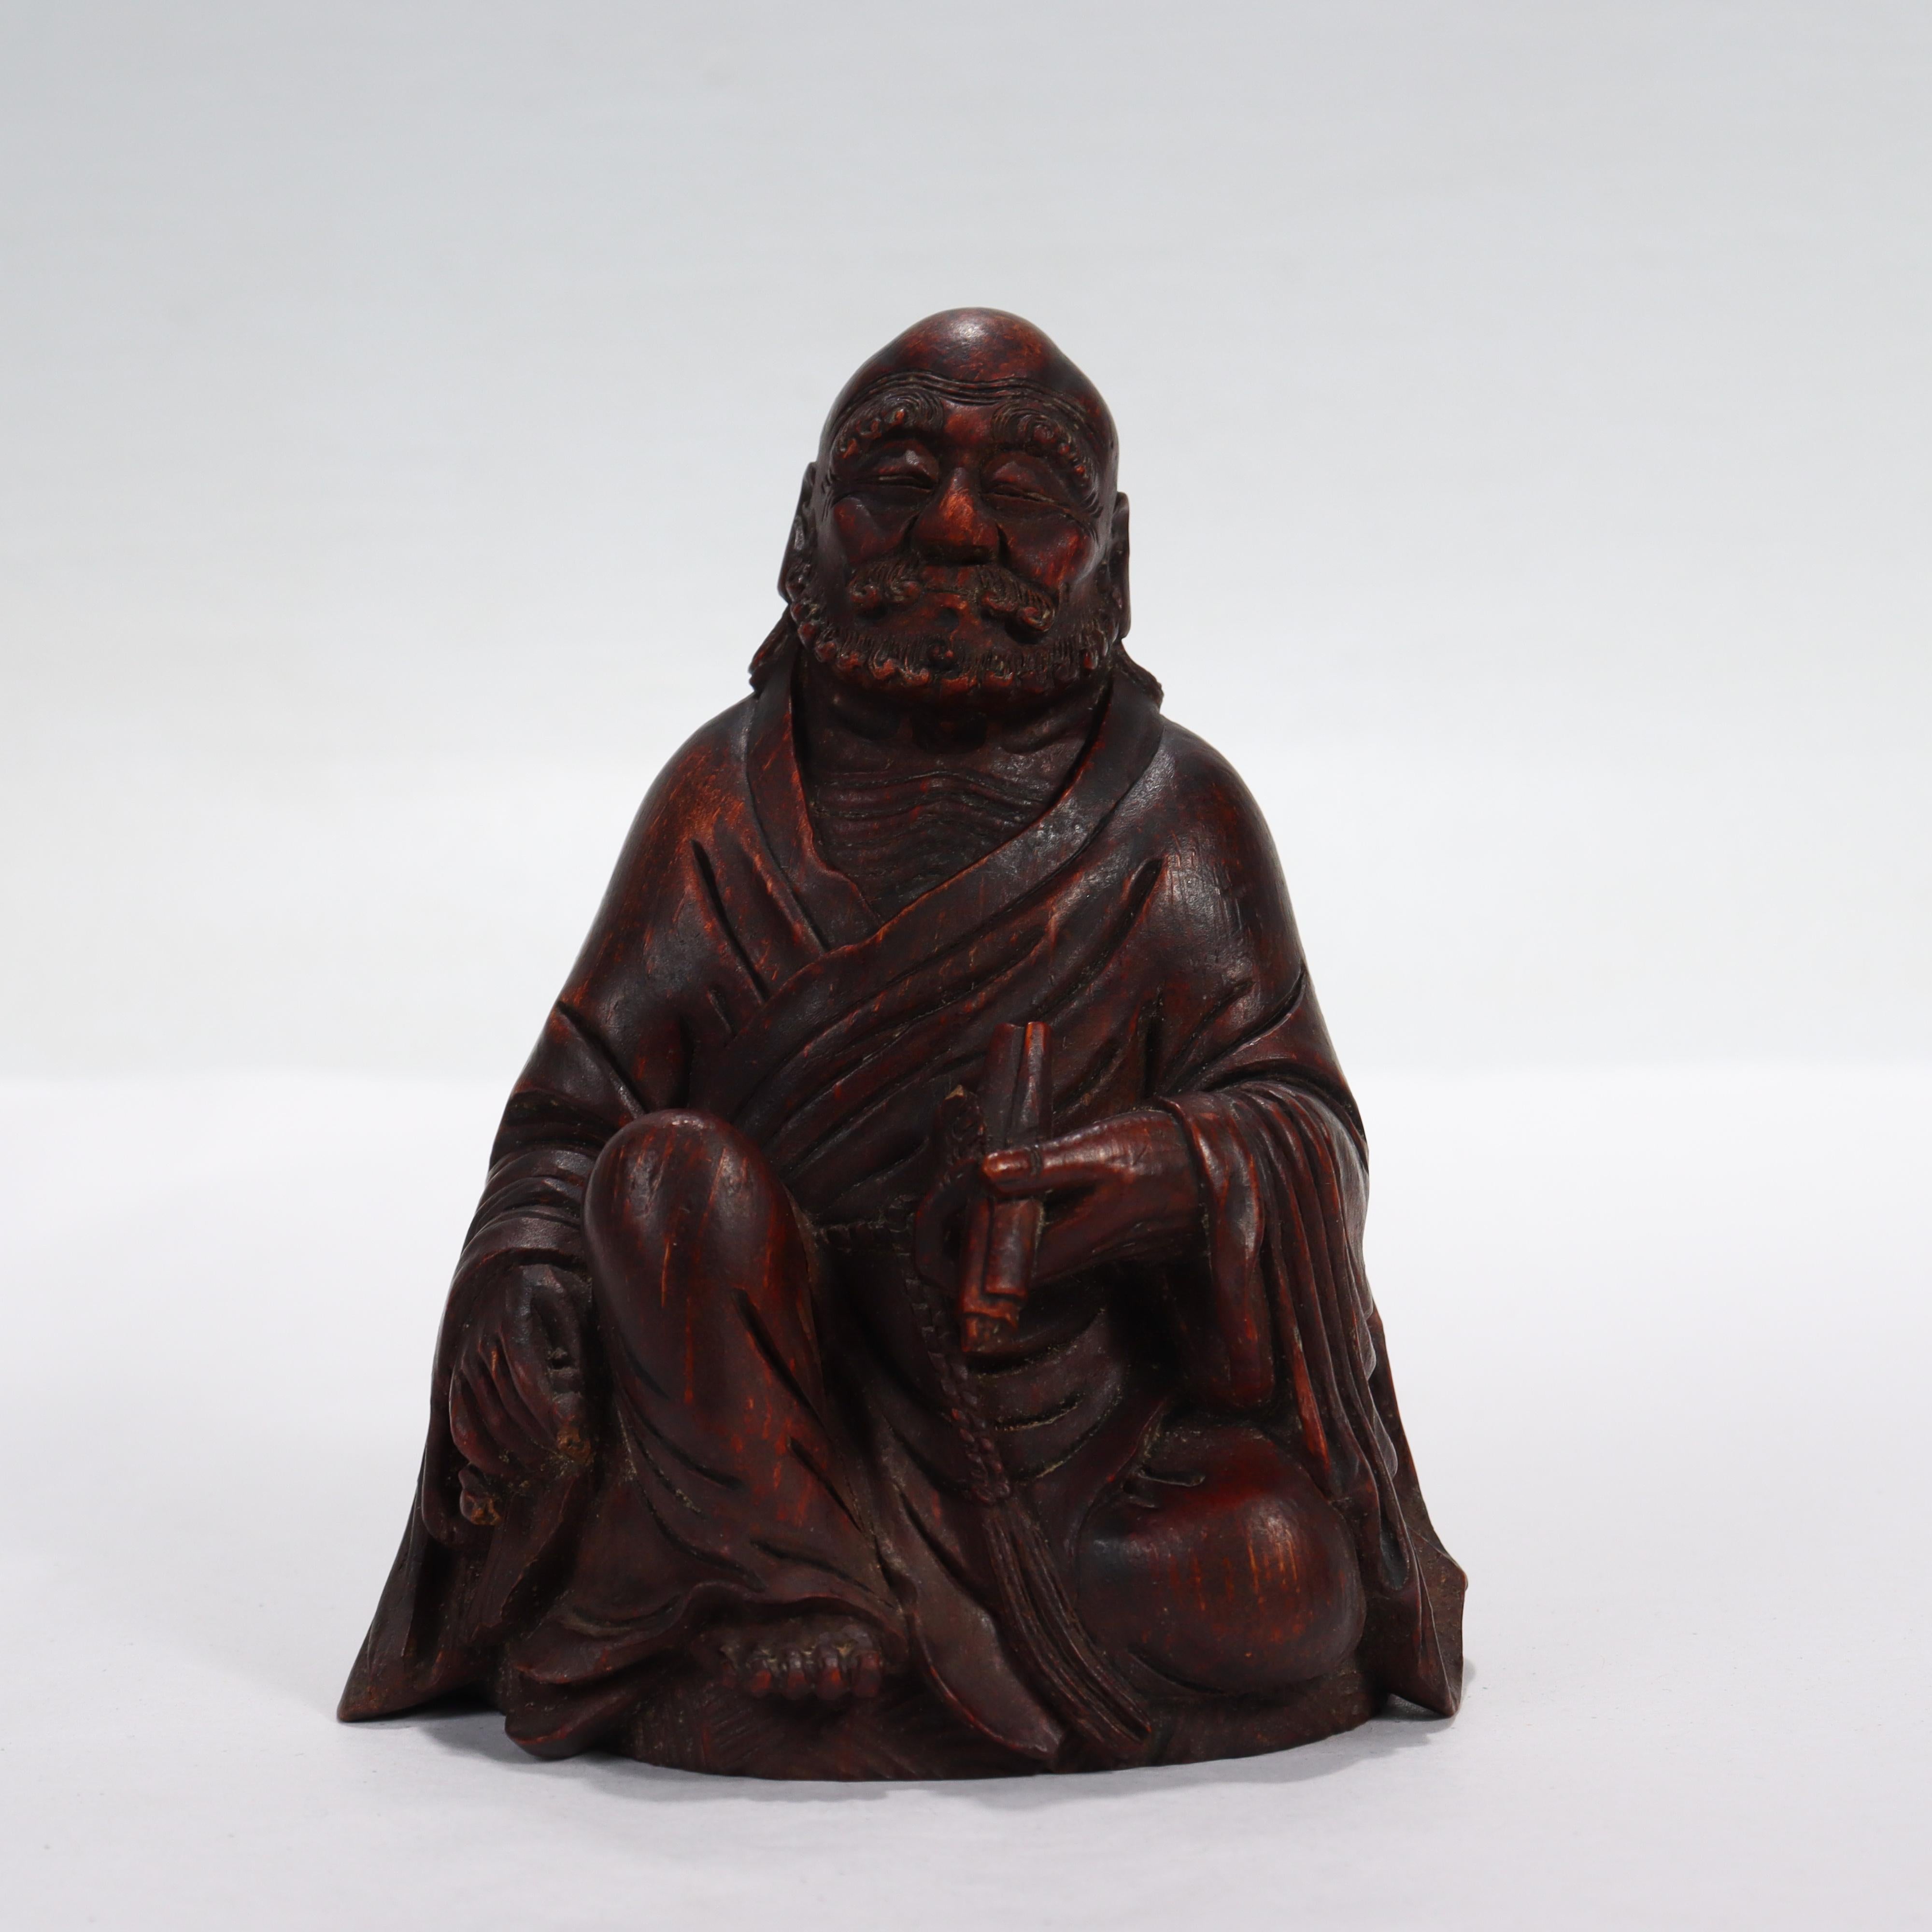 Meiji Old or Antique Japanese Wooden Figurine of a Buddhist Monk For Sale